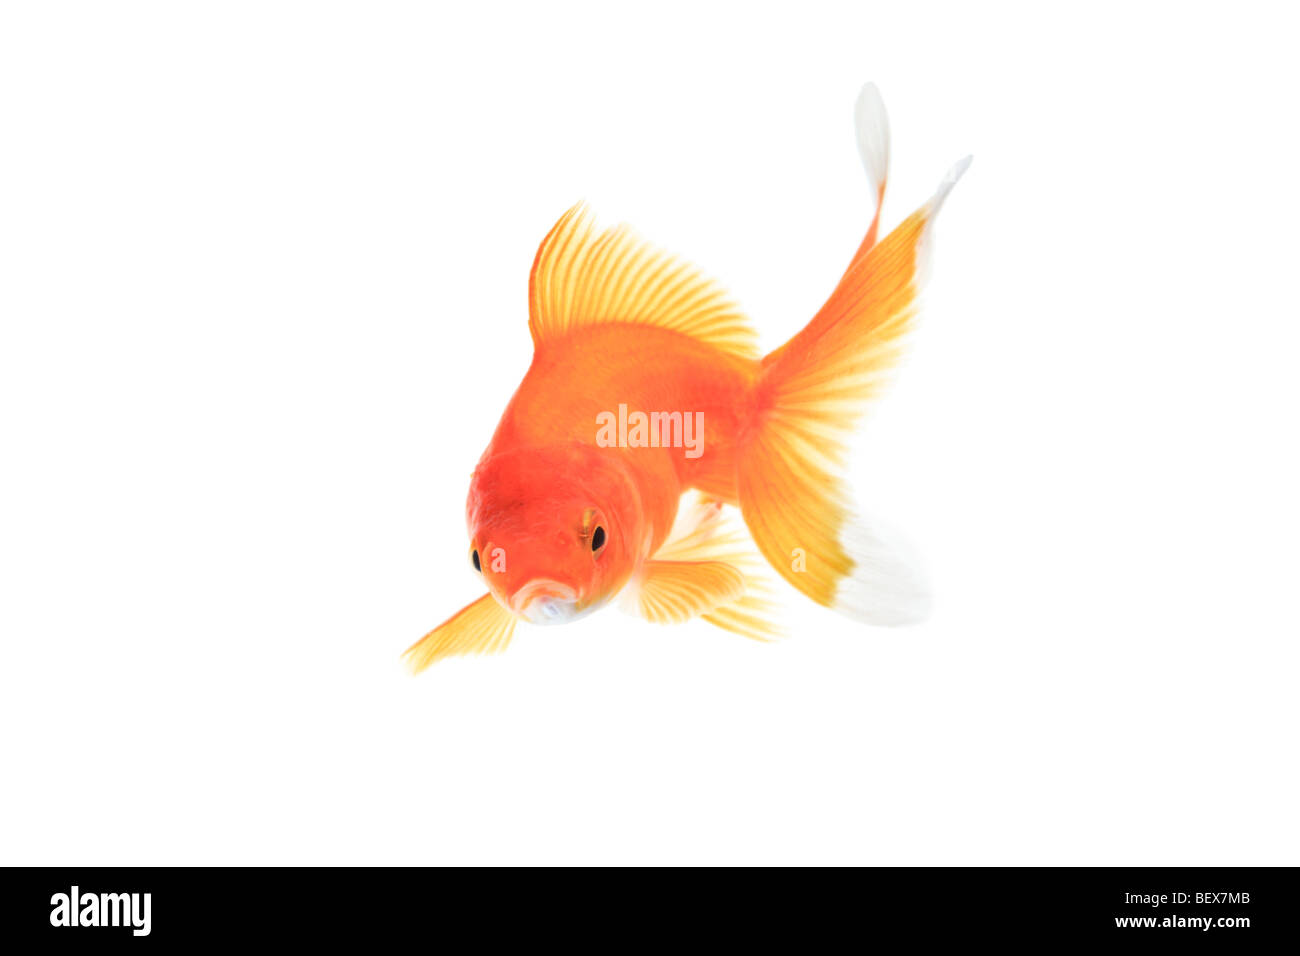 Gold fish against white background Stock Photo